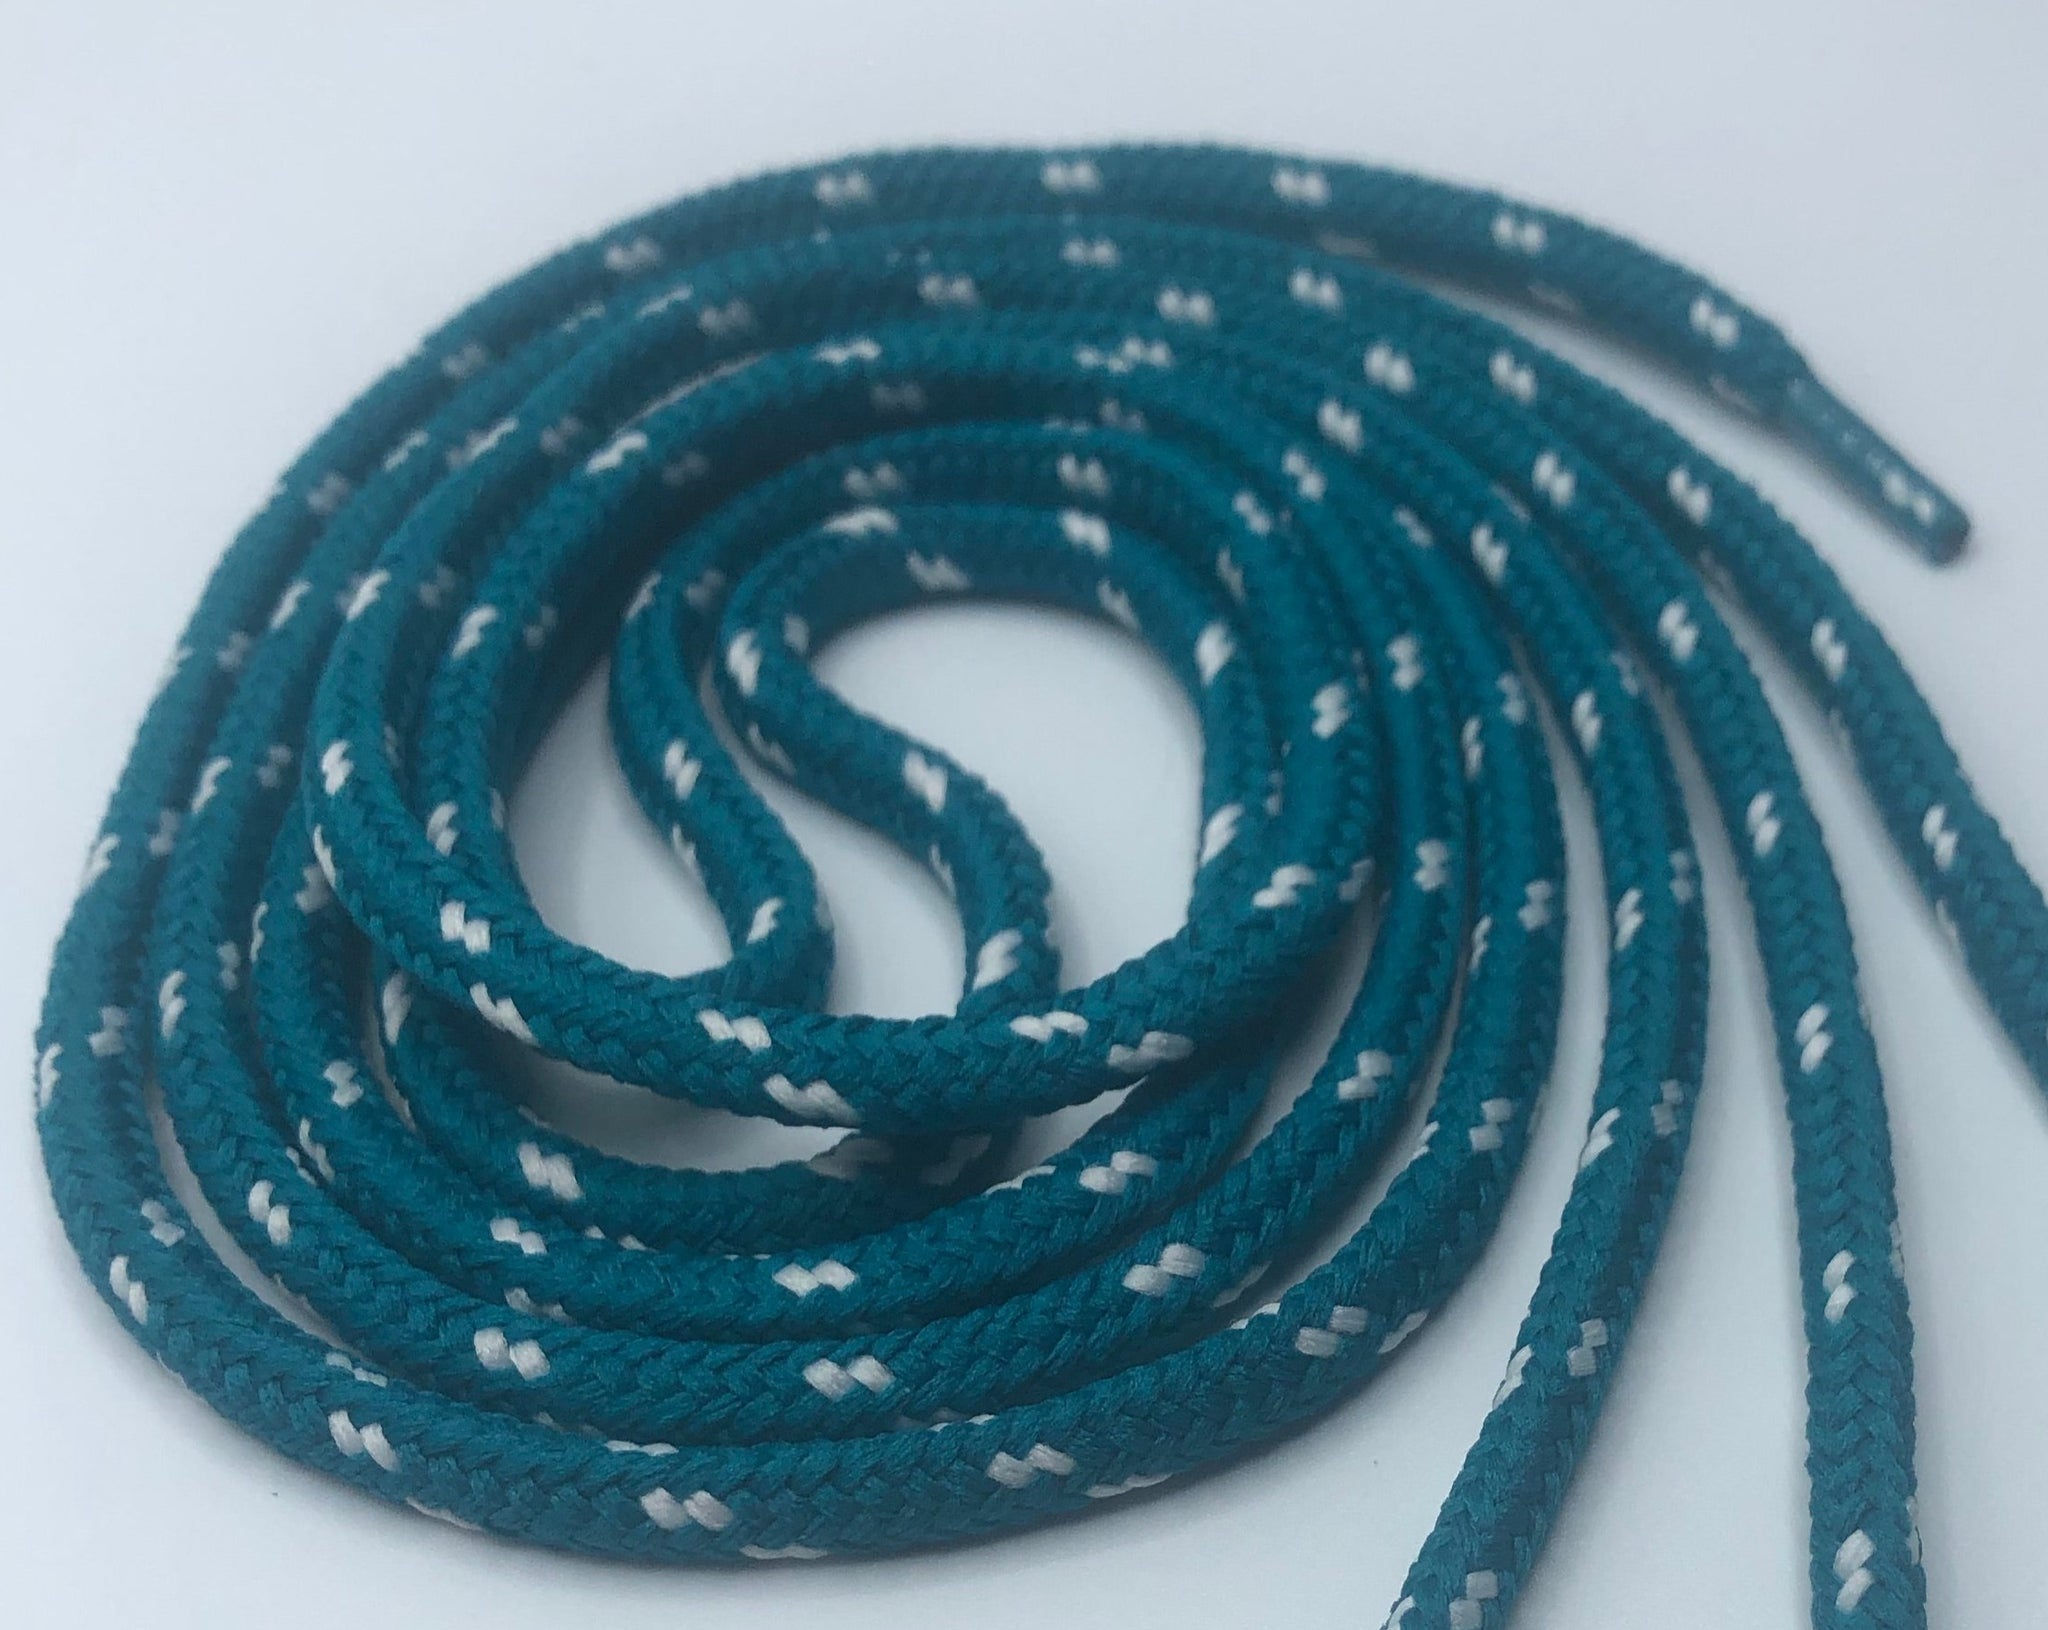 Round Classic Shoelaces - Teal with White Accents